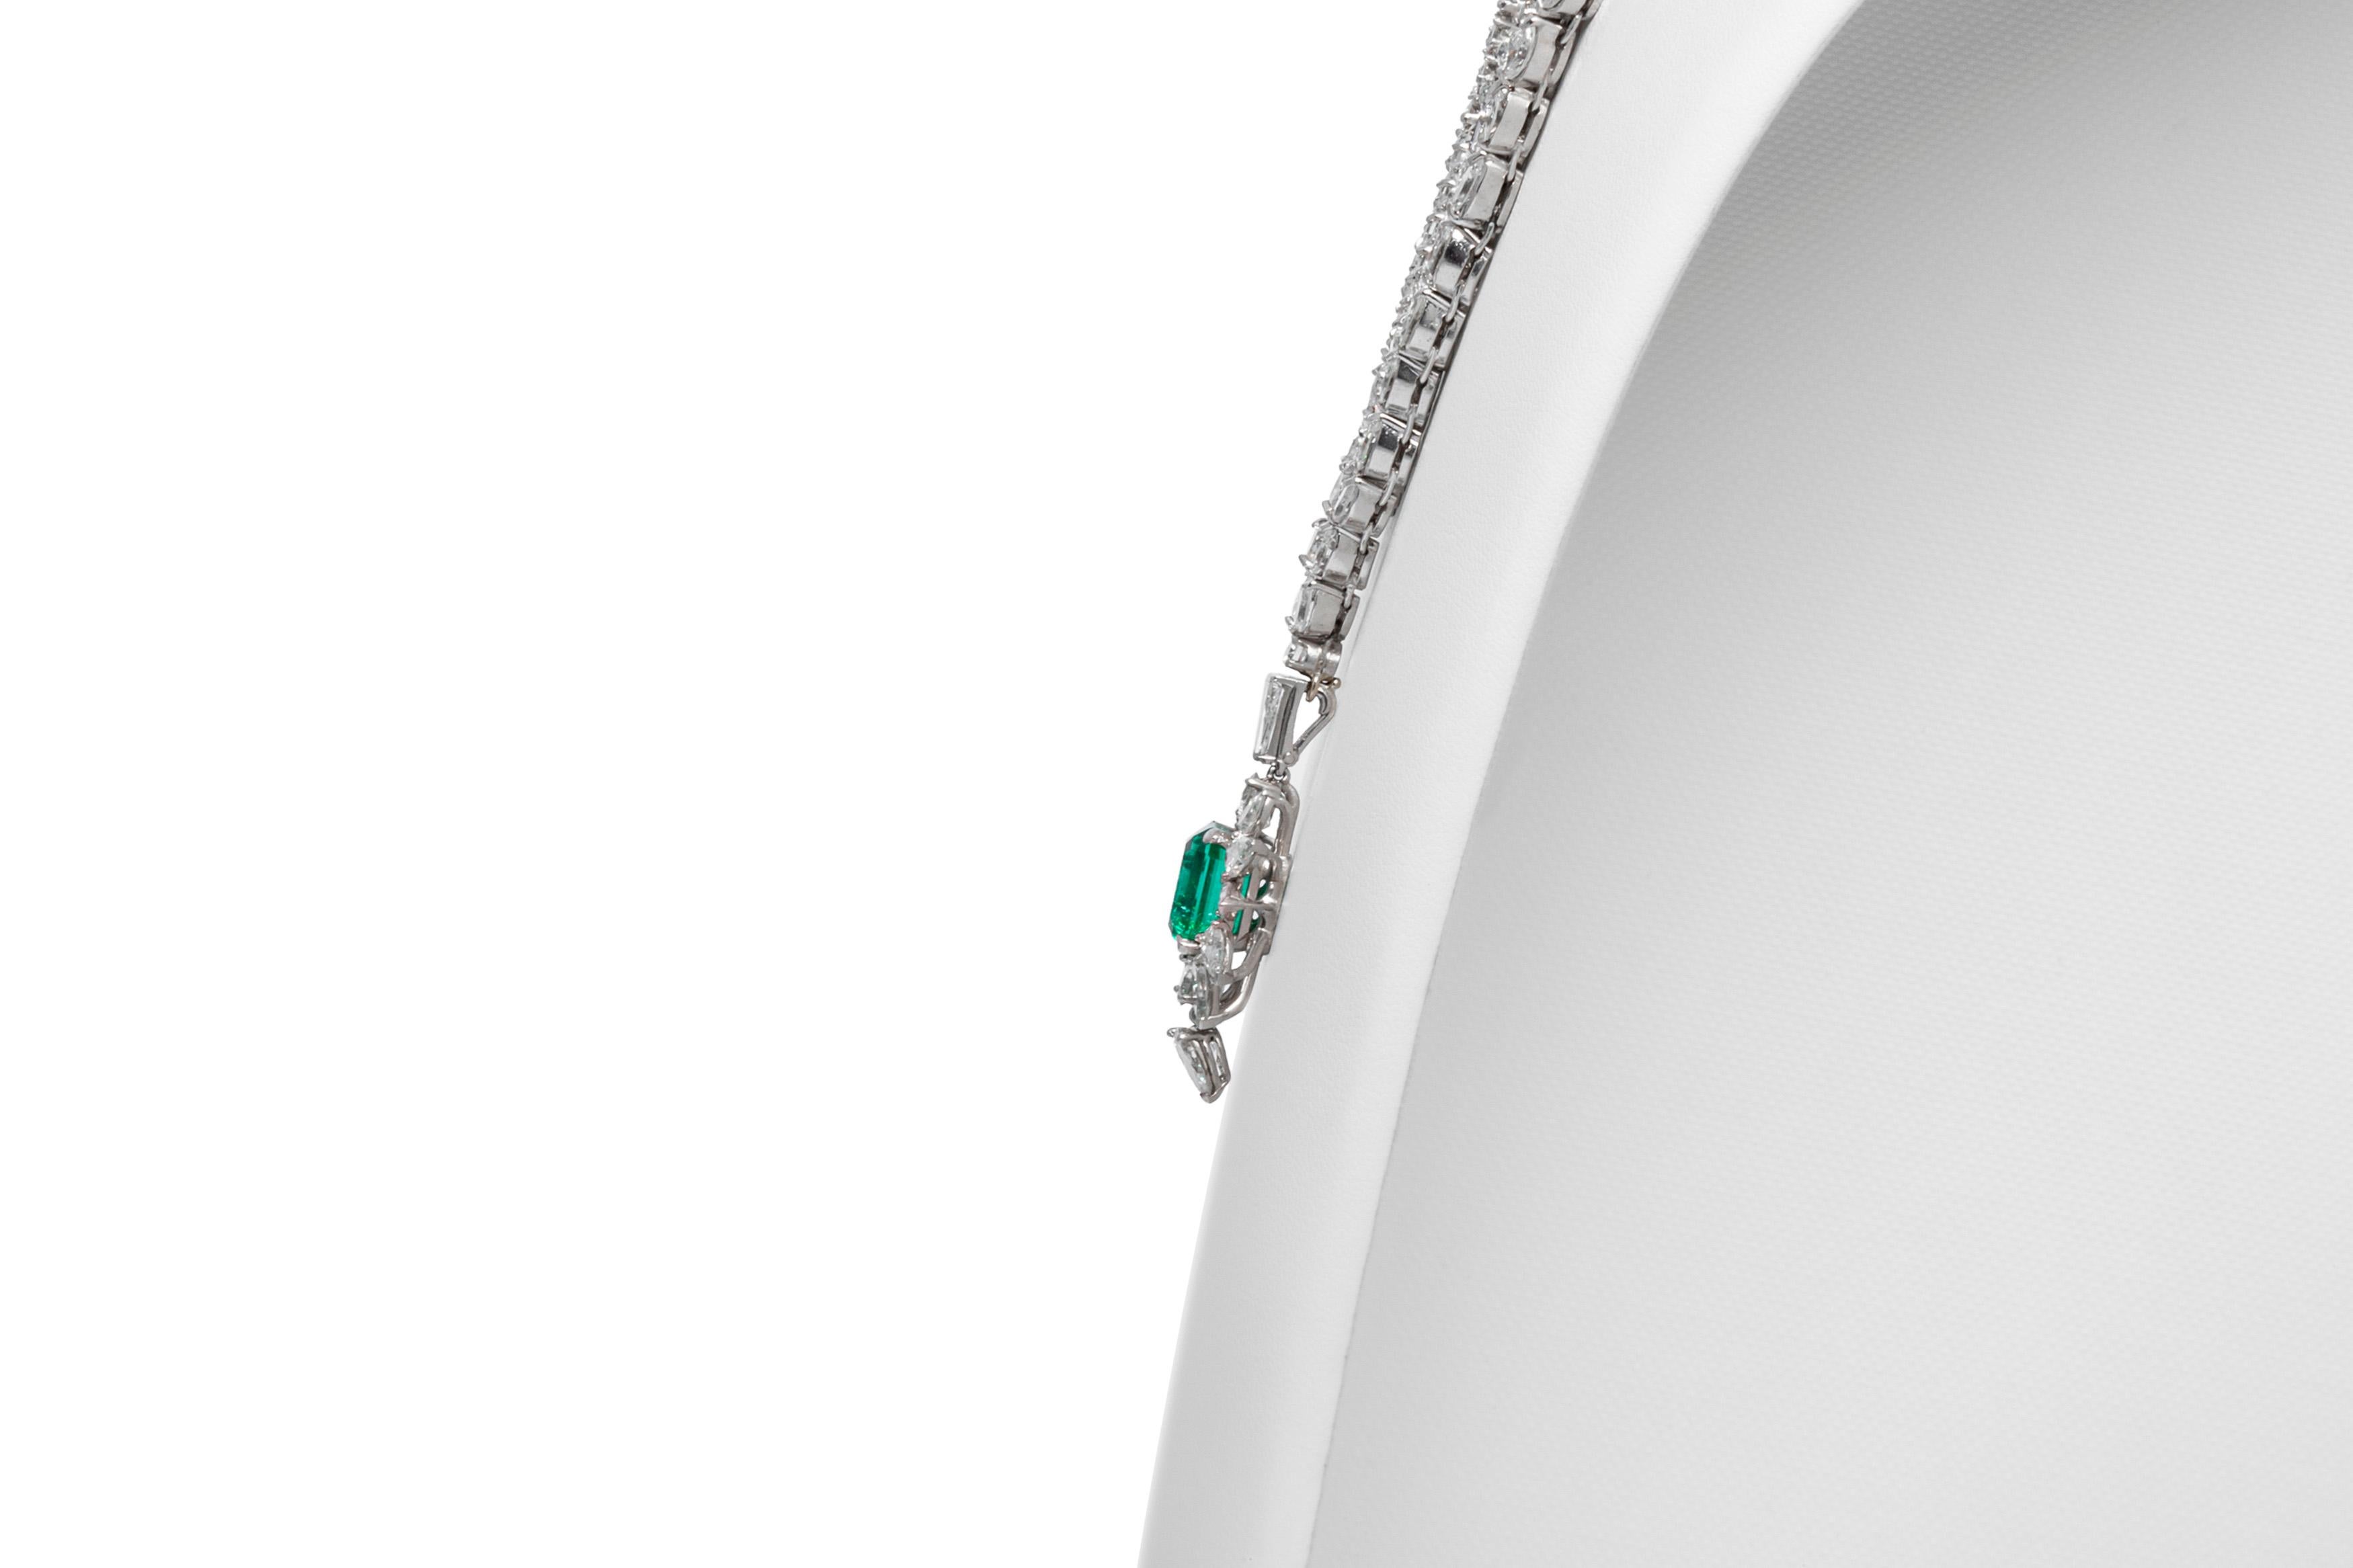 Necklace, finely crafted in platinum with diamonds weighing approximately a total of 22.00 carat and with an emerald drop weighing approximately a total of 5.00 carat and diamonds. Circa 1940's.